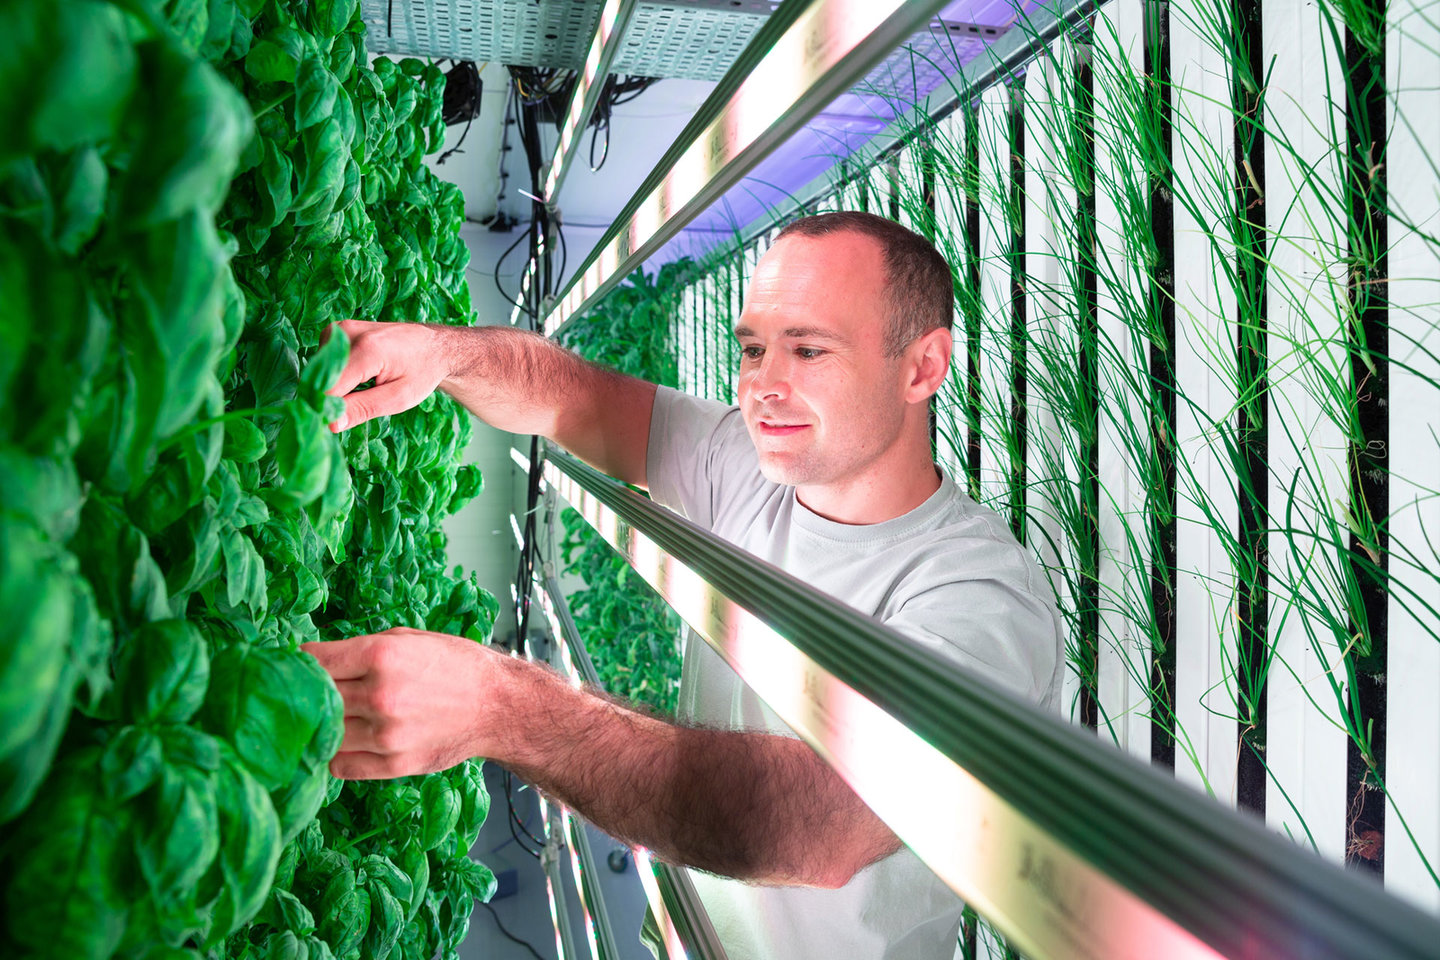 Square Mile Farms: Vertical farming in the office